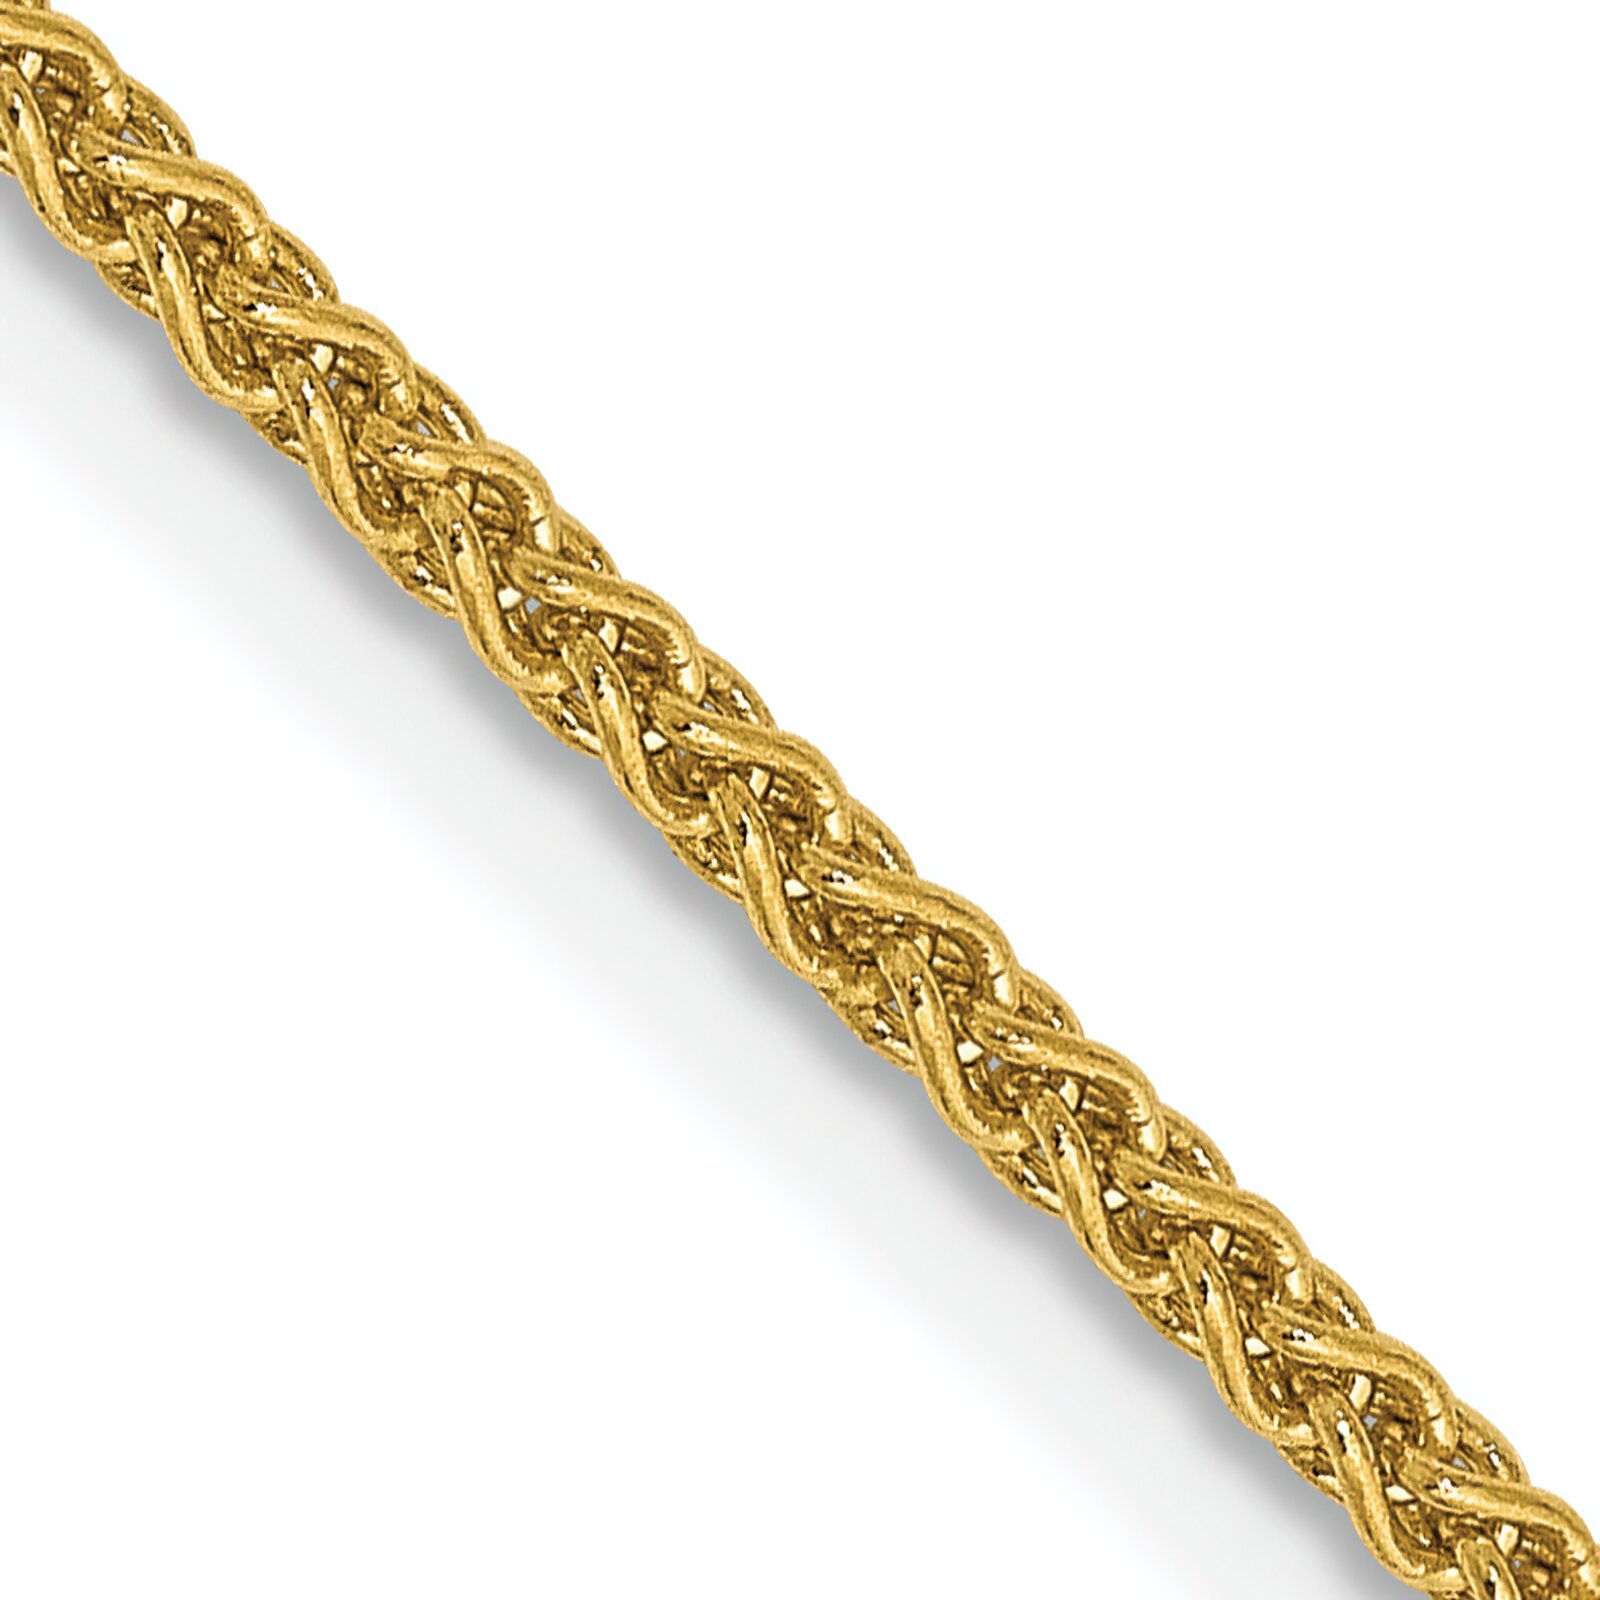 Findingking 14K Yellow Gold 1.65mm Spiga Chain Necklace Jewelry 18"